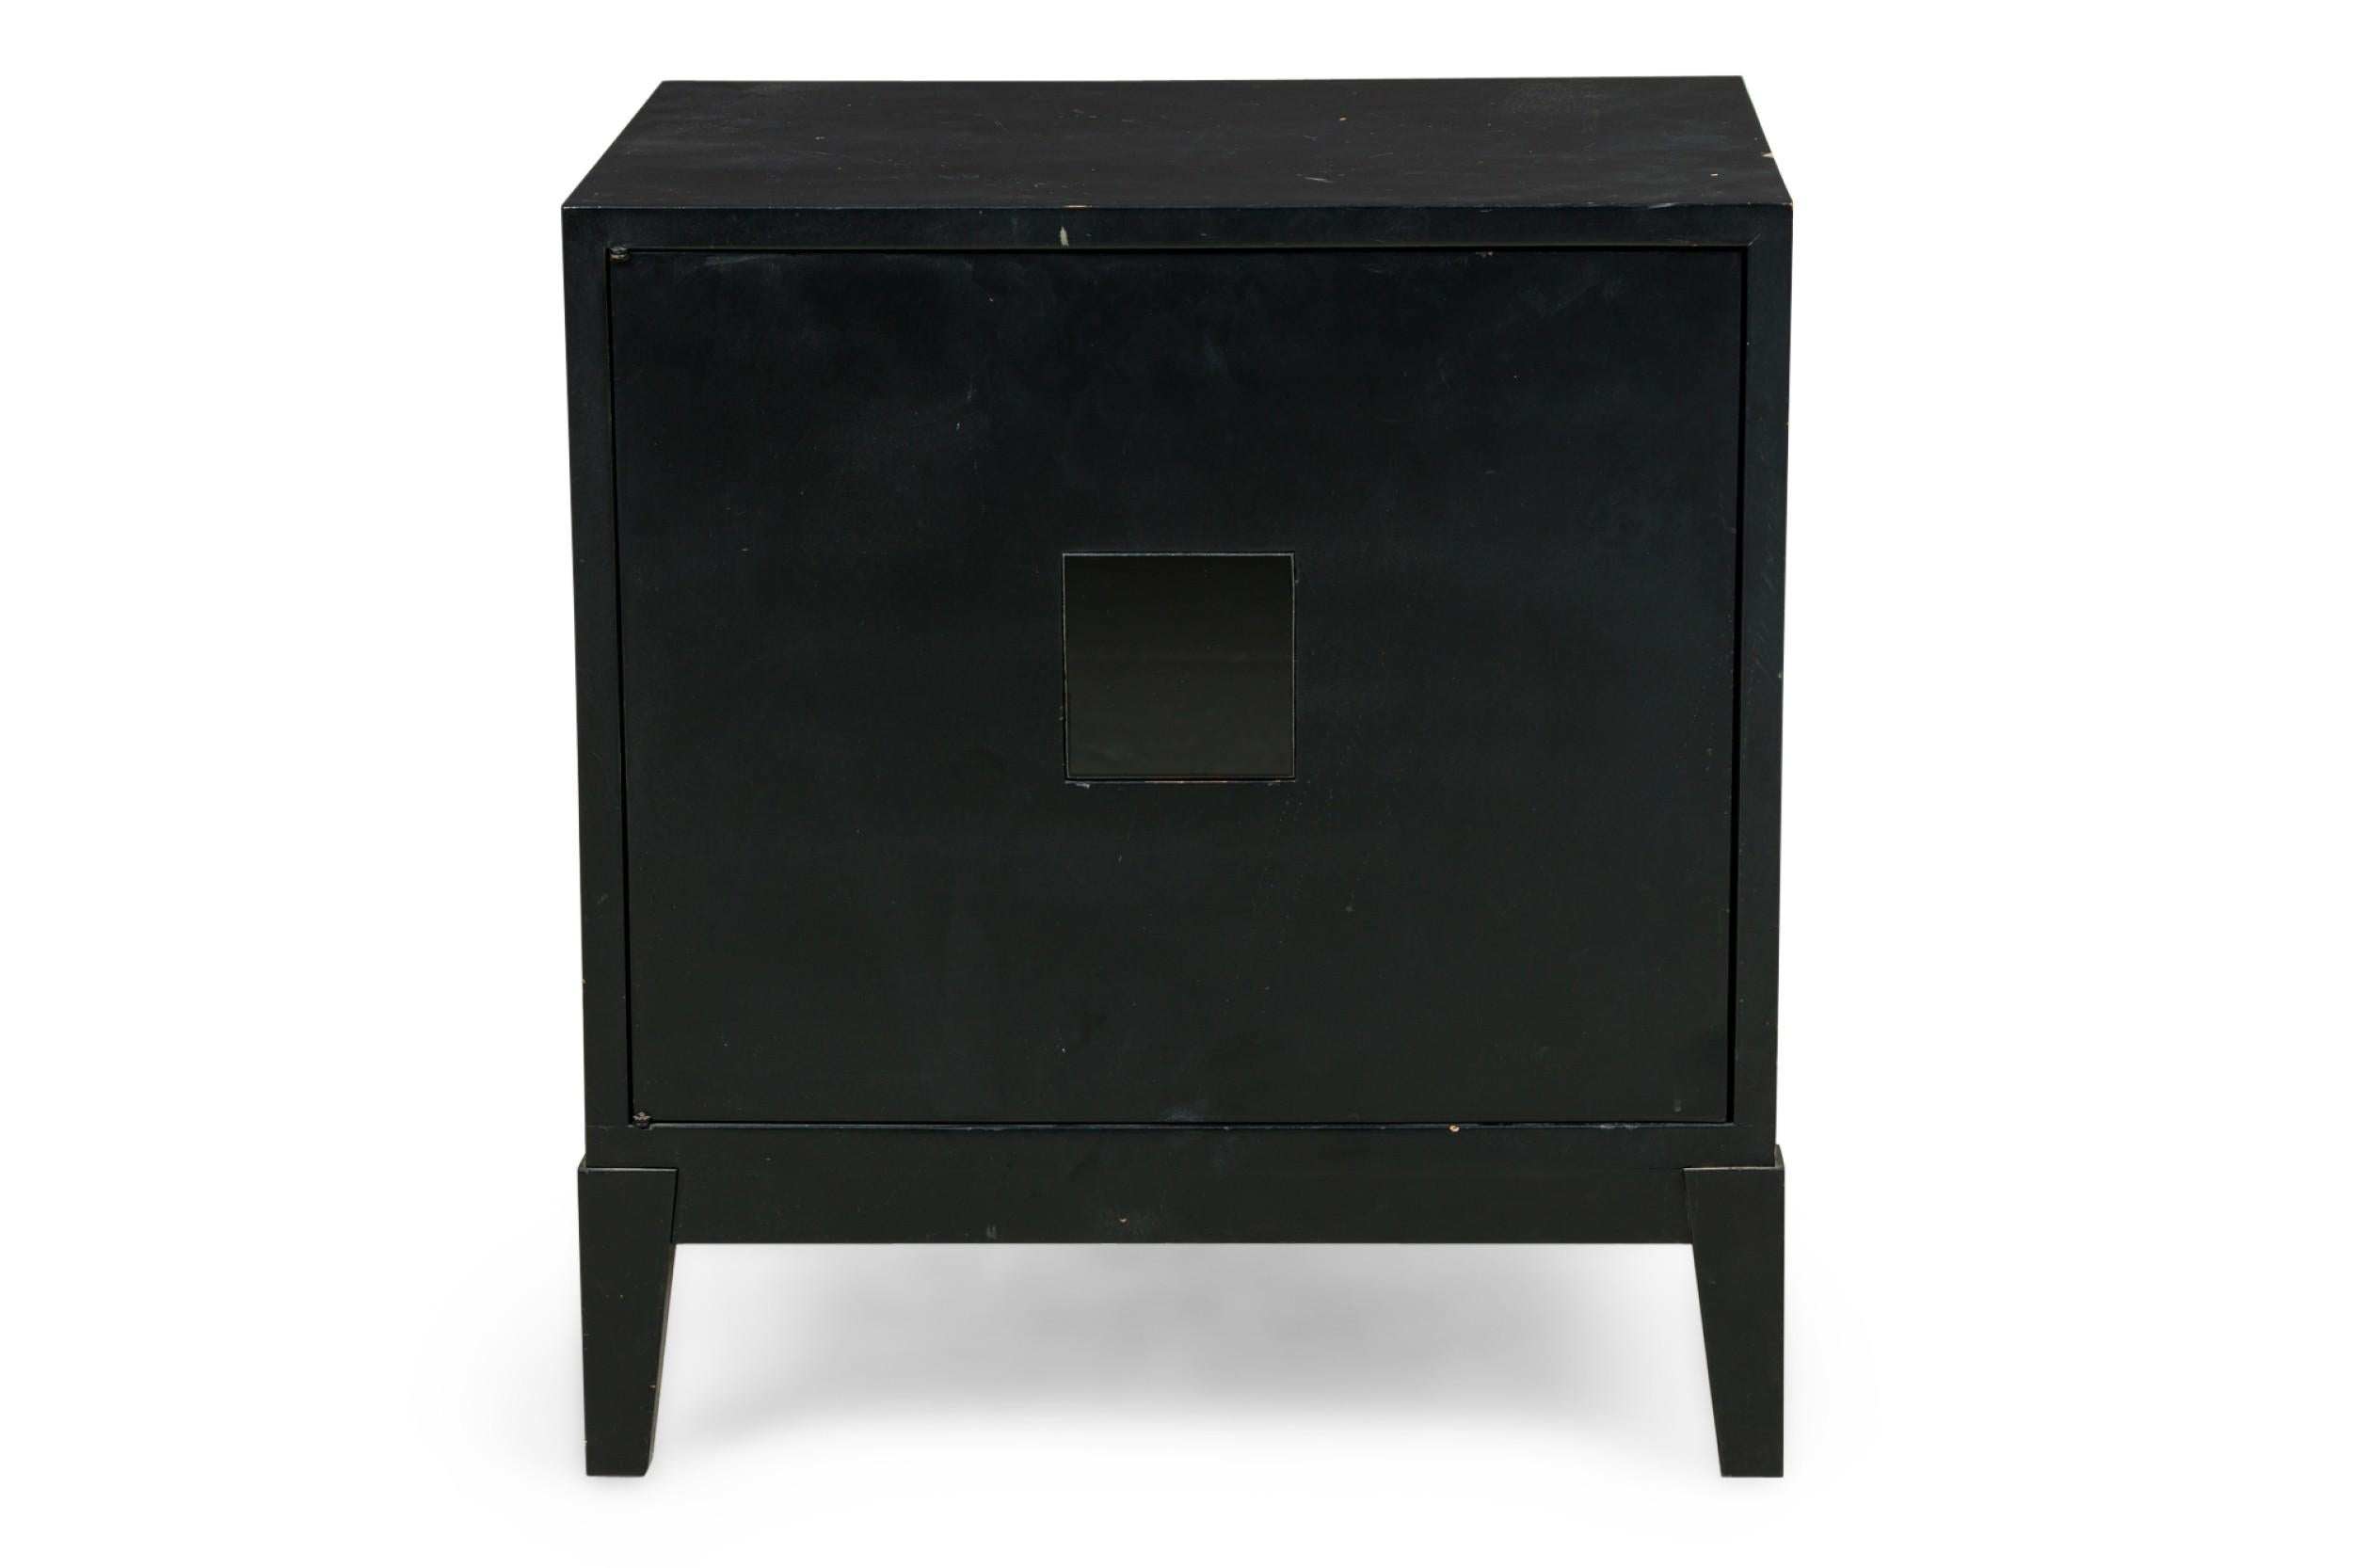 PAIR of American Mid-Century Black matte and shiny lacquer cube shaped bedside commodes / tables with 2 front doors and resting a slightly flaired taped square legs (att: JAMES MONT) (PRICED AS PAIR)
 

Condition: Good; Wear consistent with age and